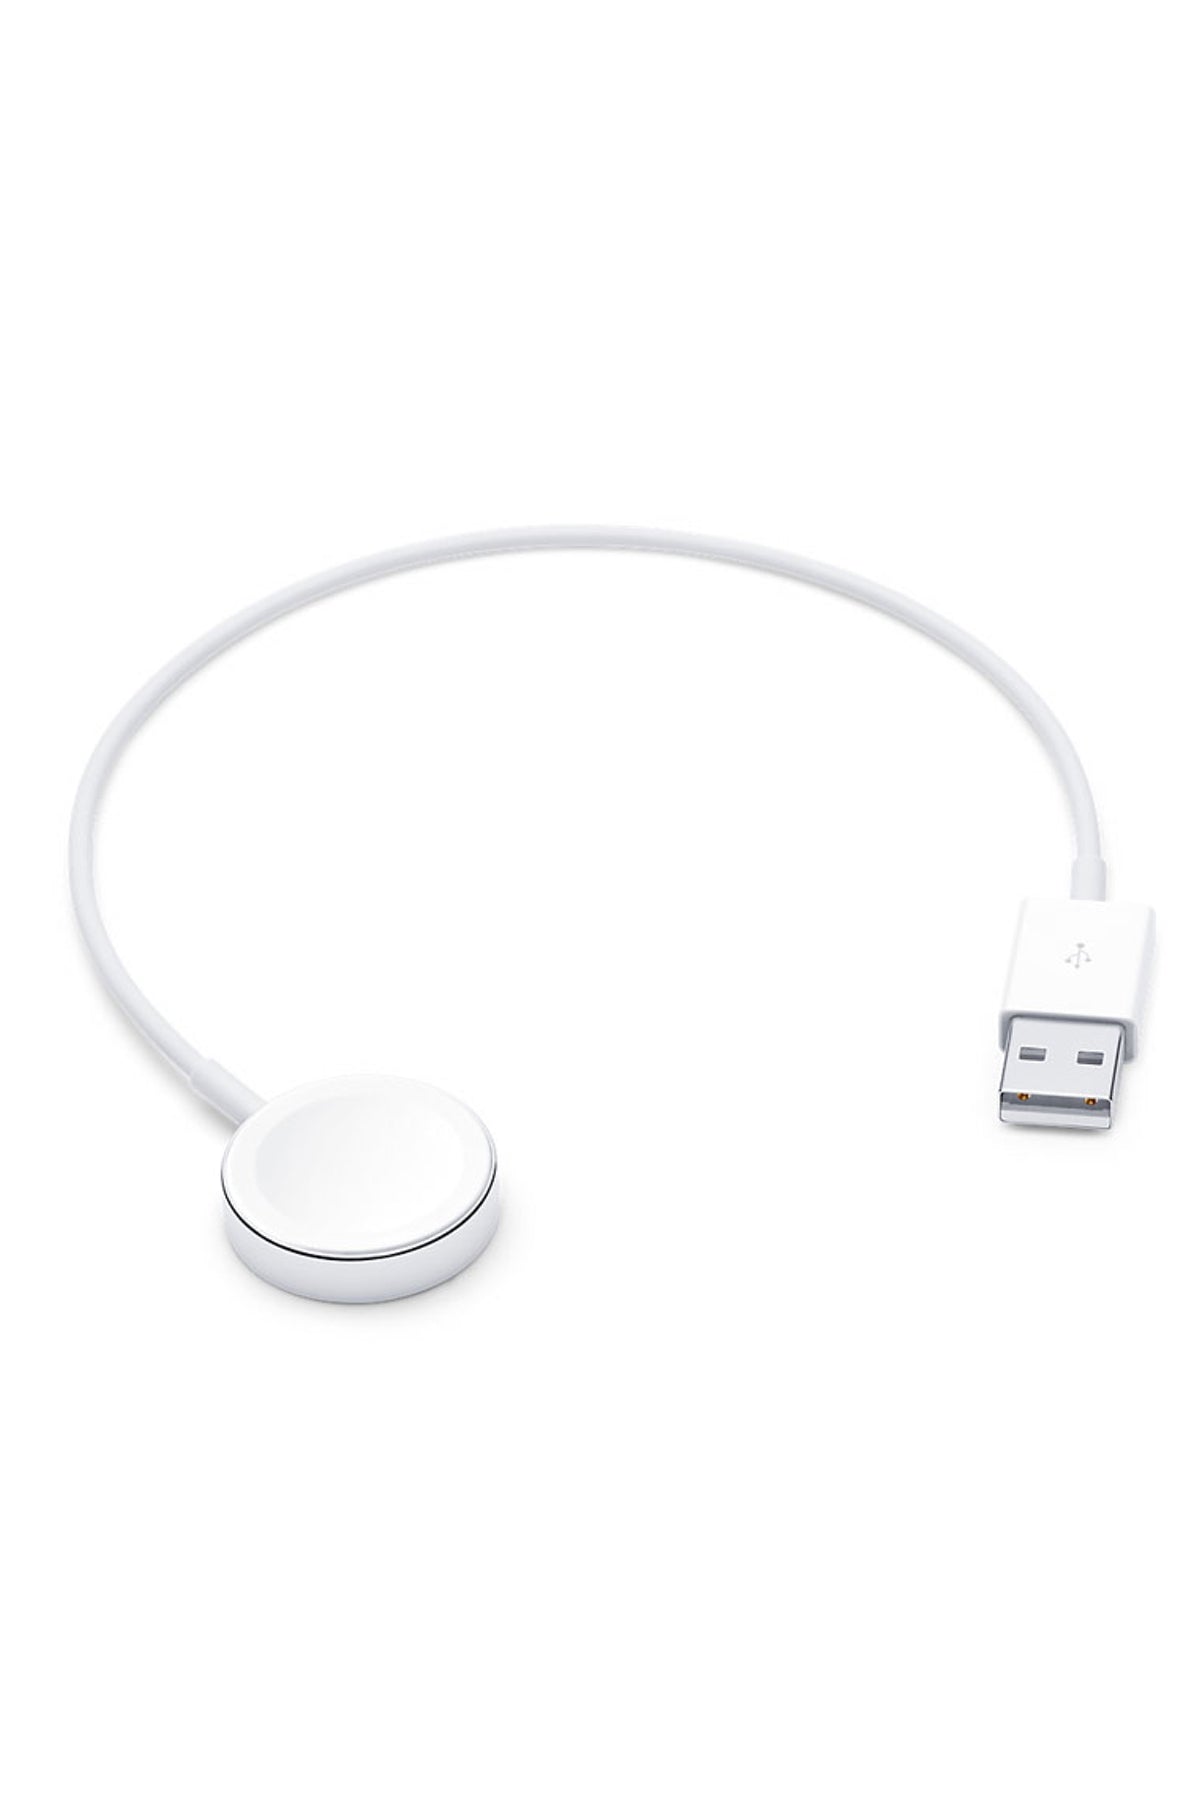 Joyroom Apple Watch Compatible Magnetic Short Charging Cable 30cm 